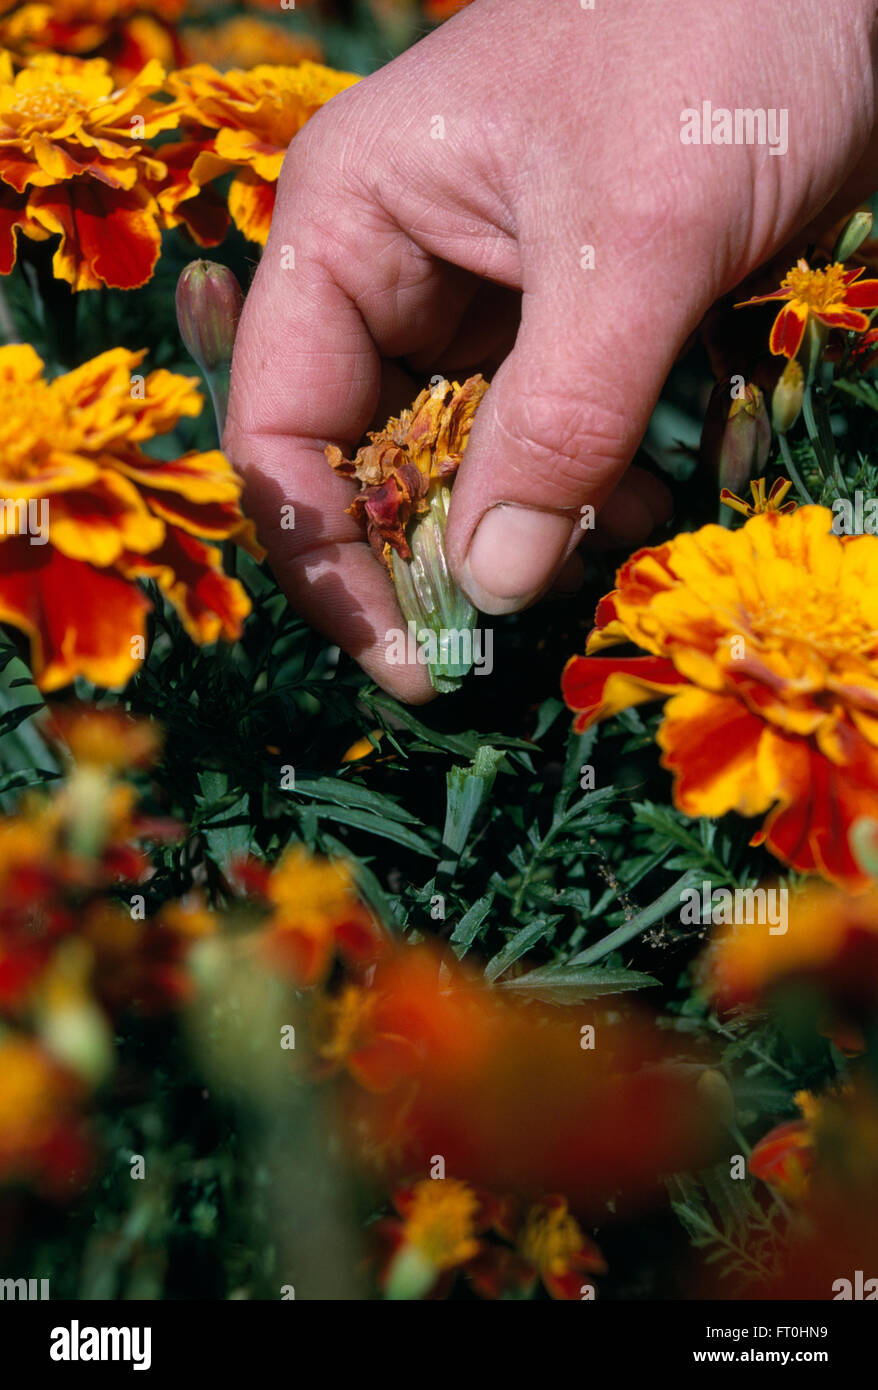 Close-up of hands dead heading French Marigolds Stock Photo